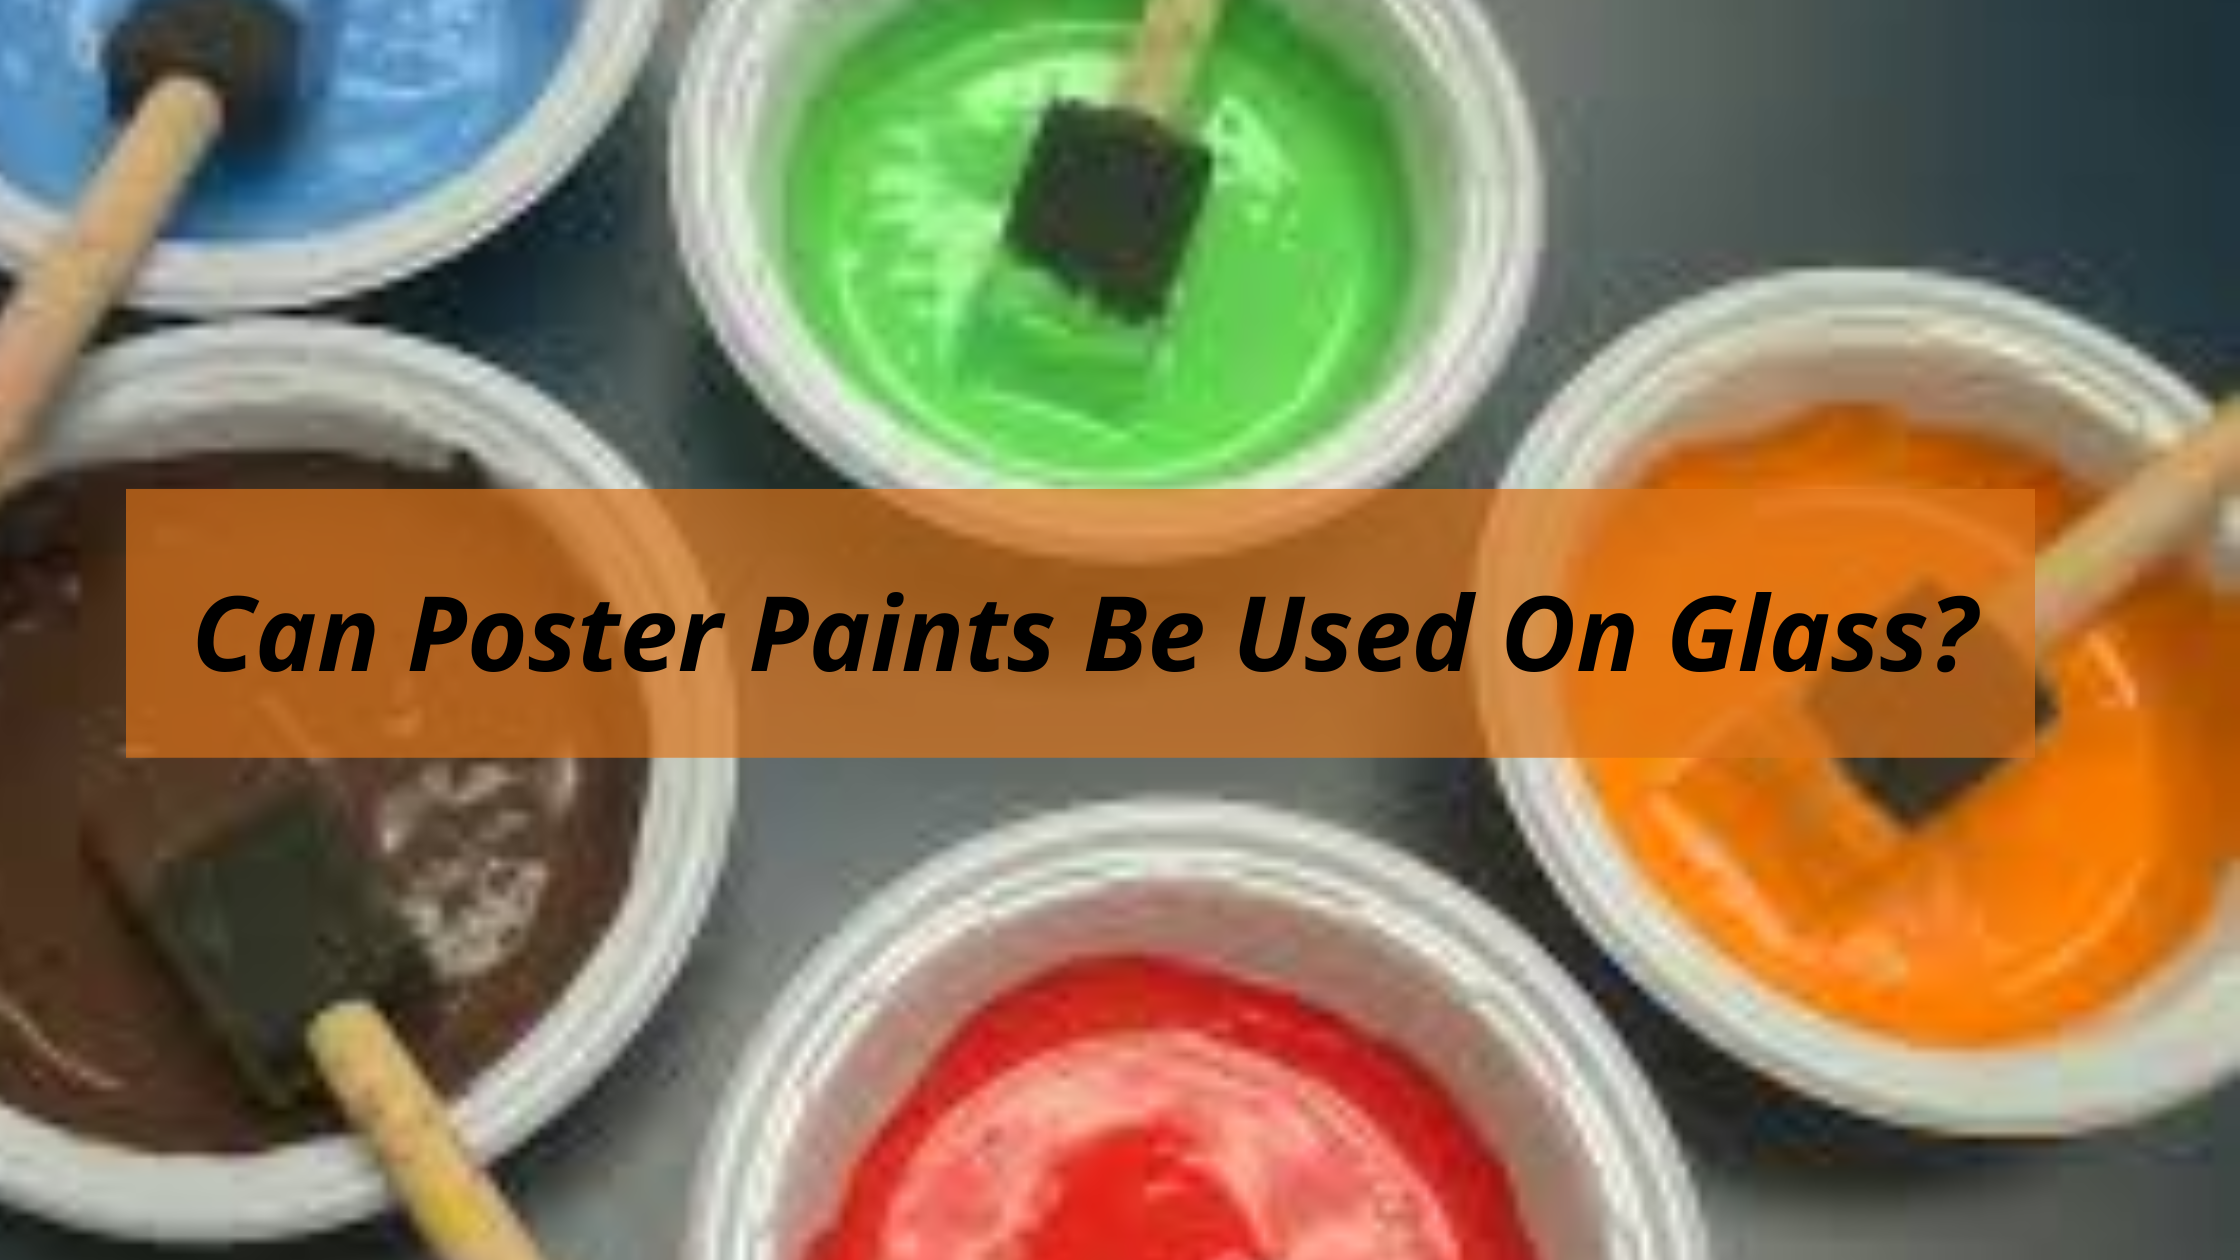 Can Poster Paints Be Used On Glass?